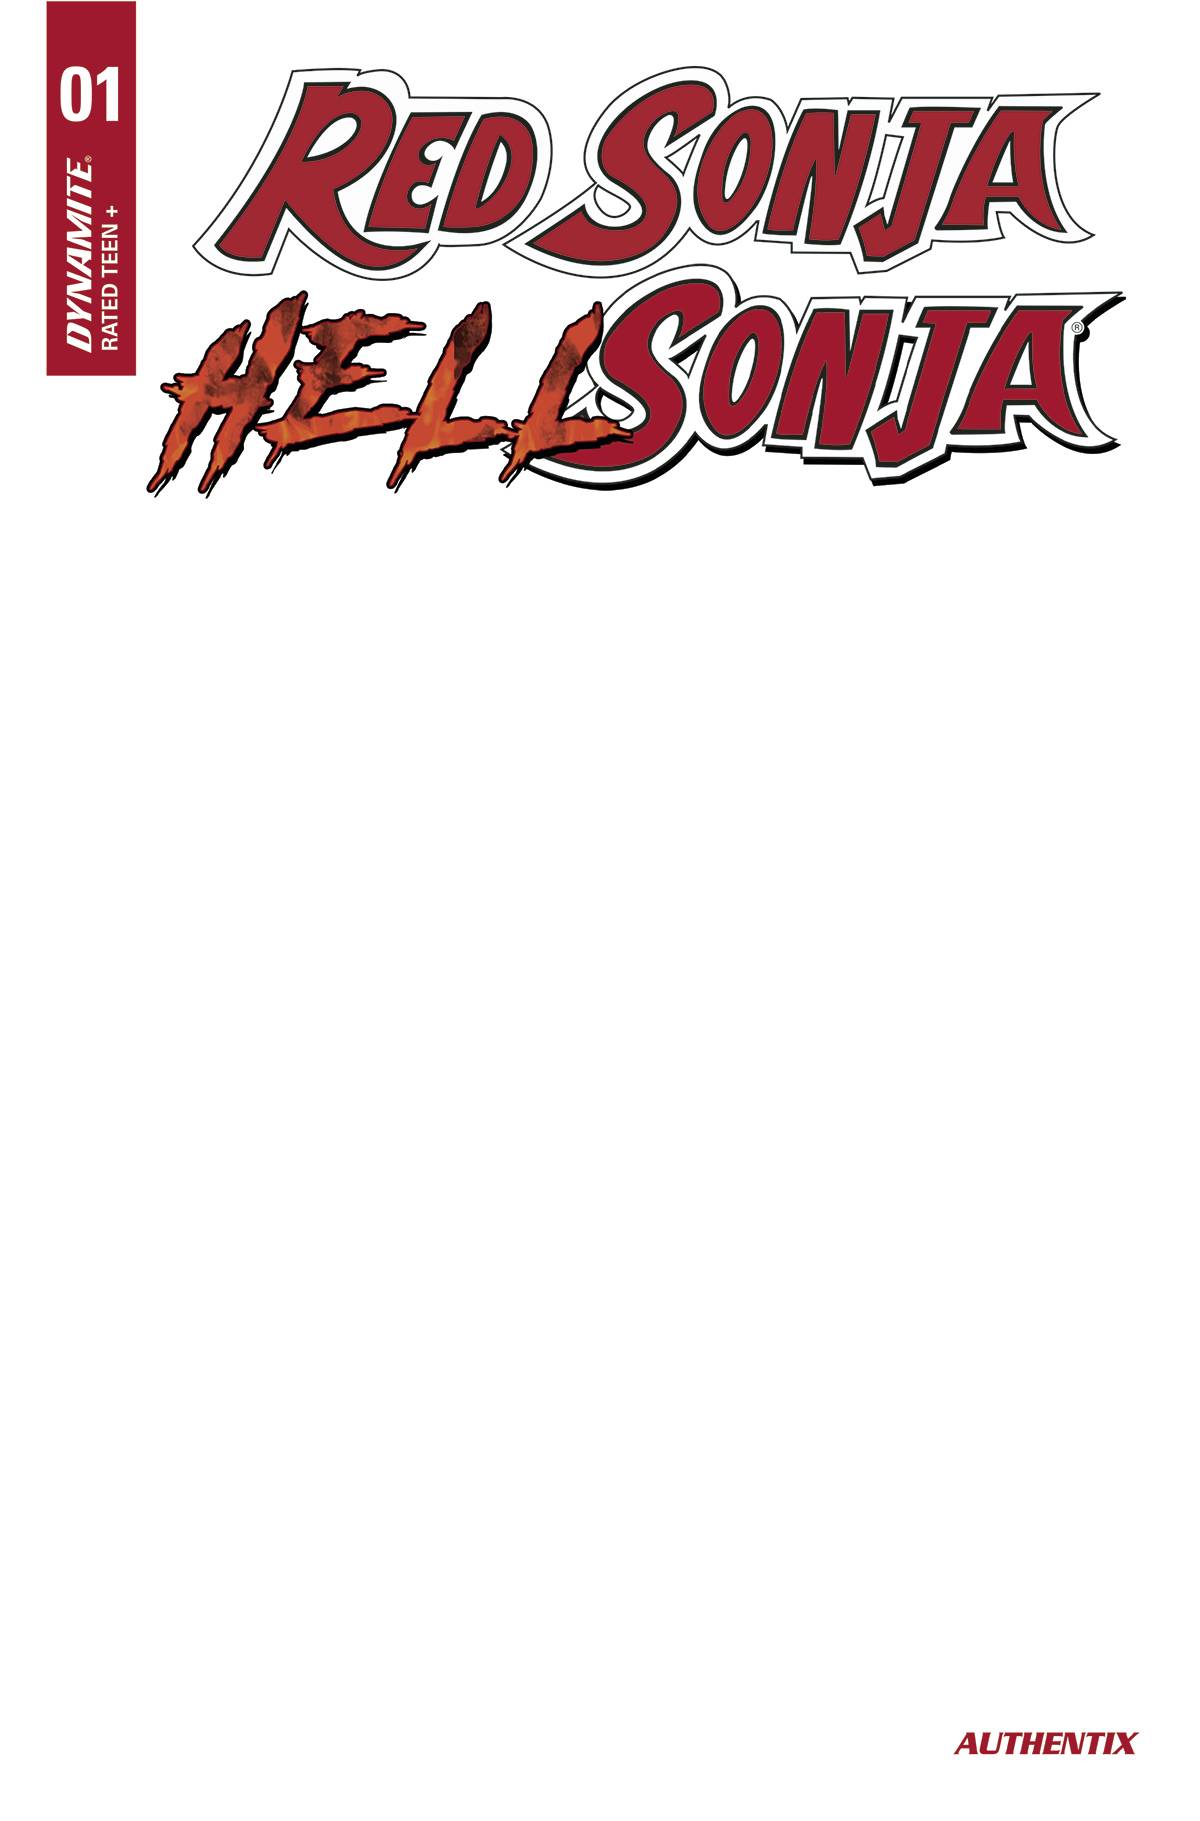 Red Sonja Hell Sonja #1 Cover F Blank Authentix